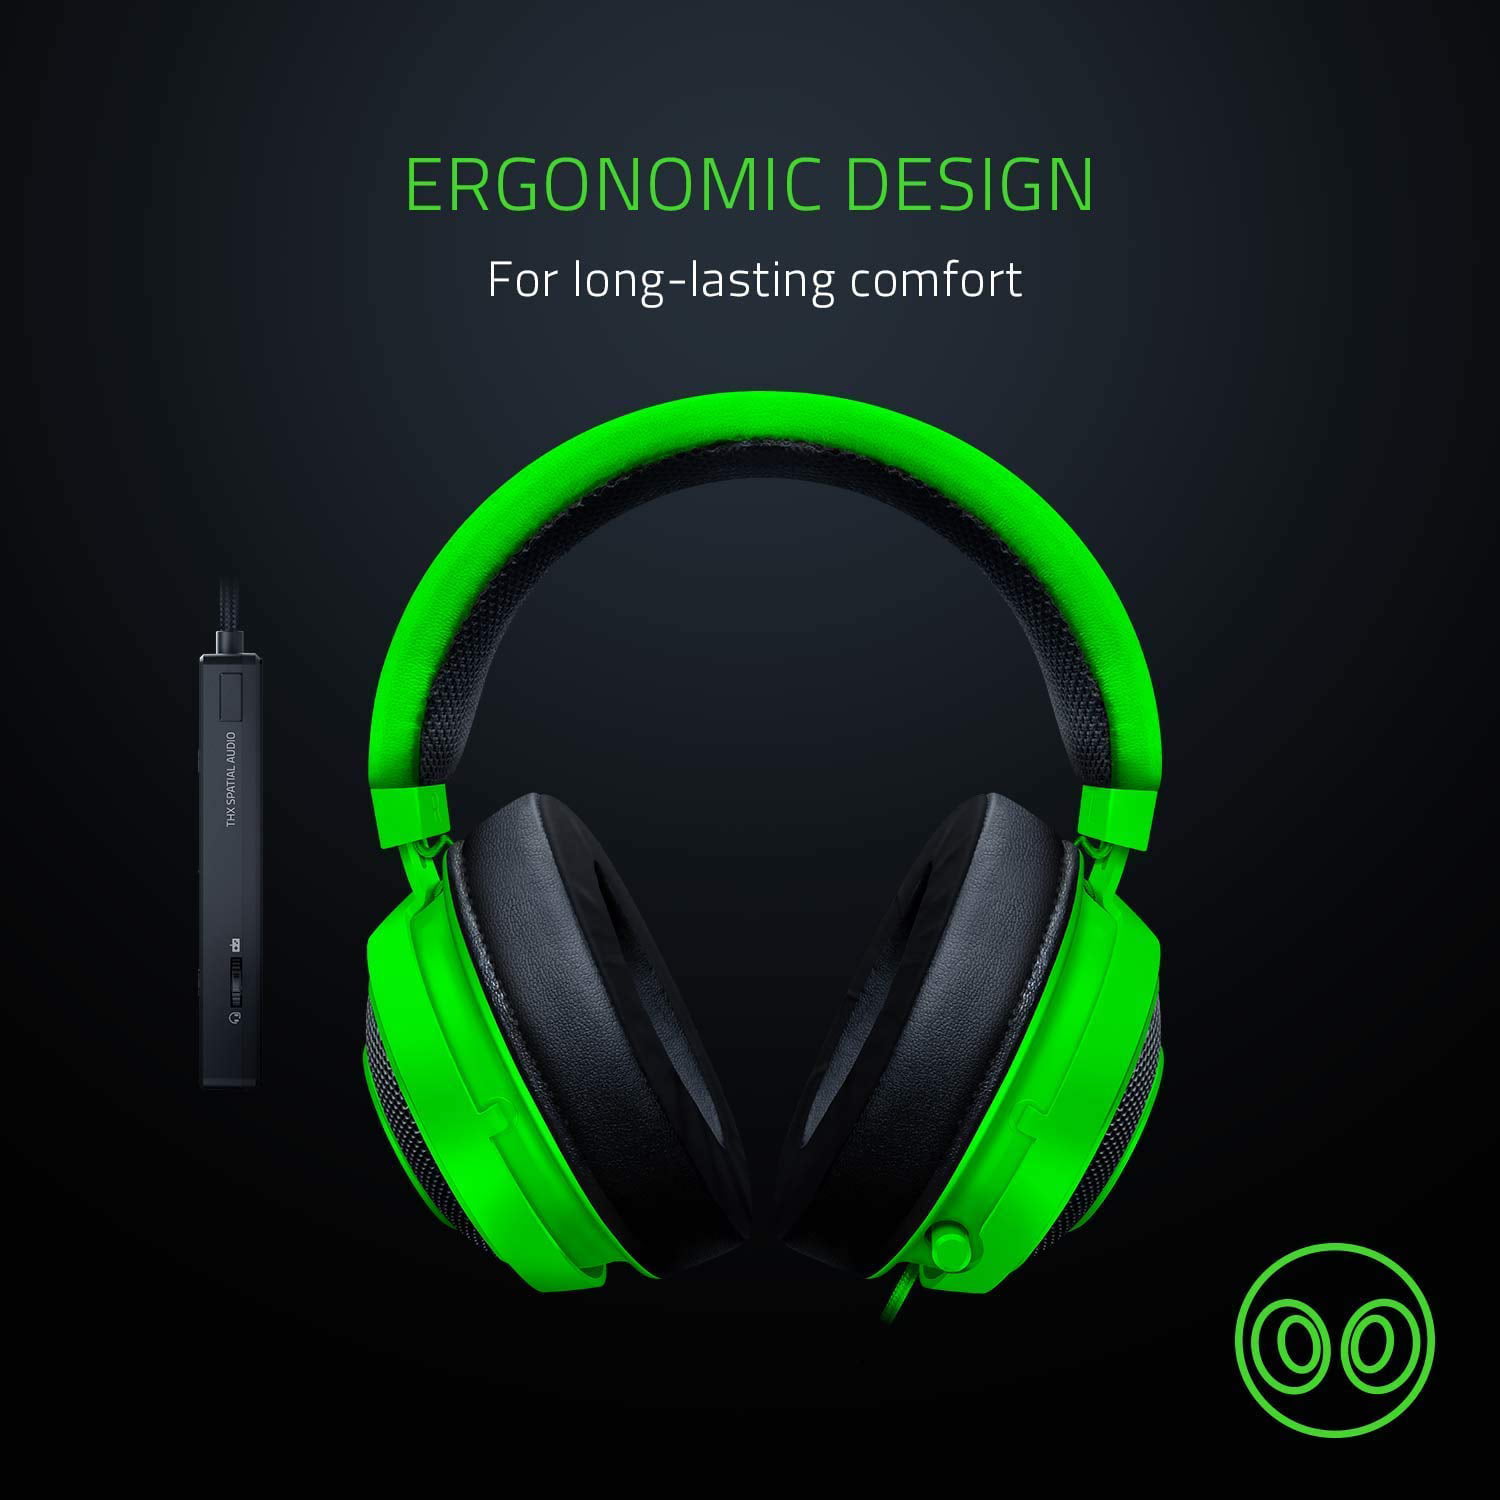 badminton Koel Circulaire Razer Kraken Tournament Edition: THX Spatial Audio - Full Audio Control -  Cooling Gel-Infused Ear Cushions - Gaming Headset Works with PC, PS4, Xbox  One, Switch, Mobile Devices - Green - Walmart.com